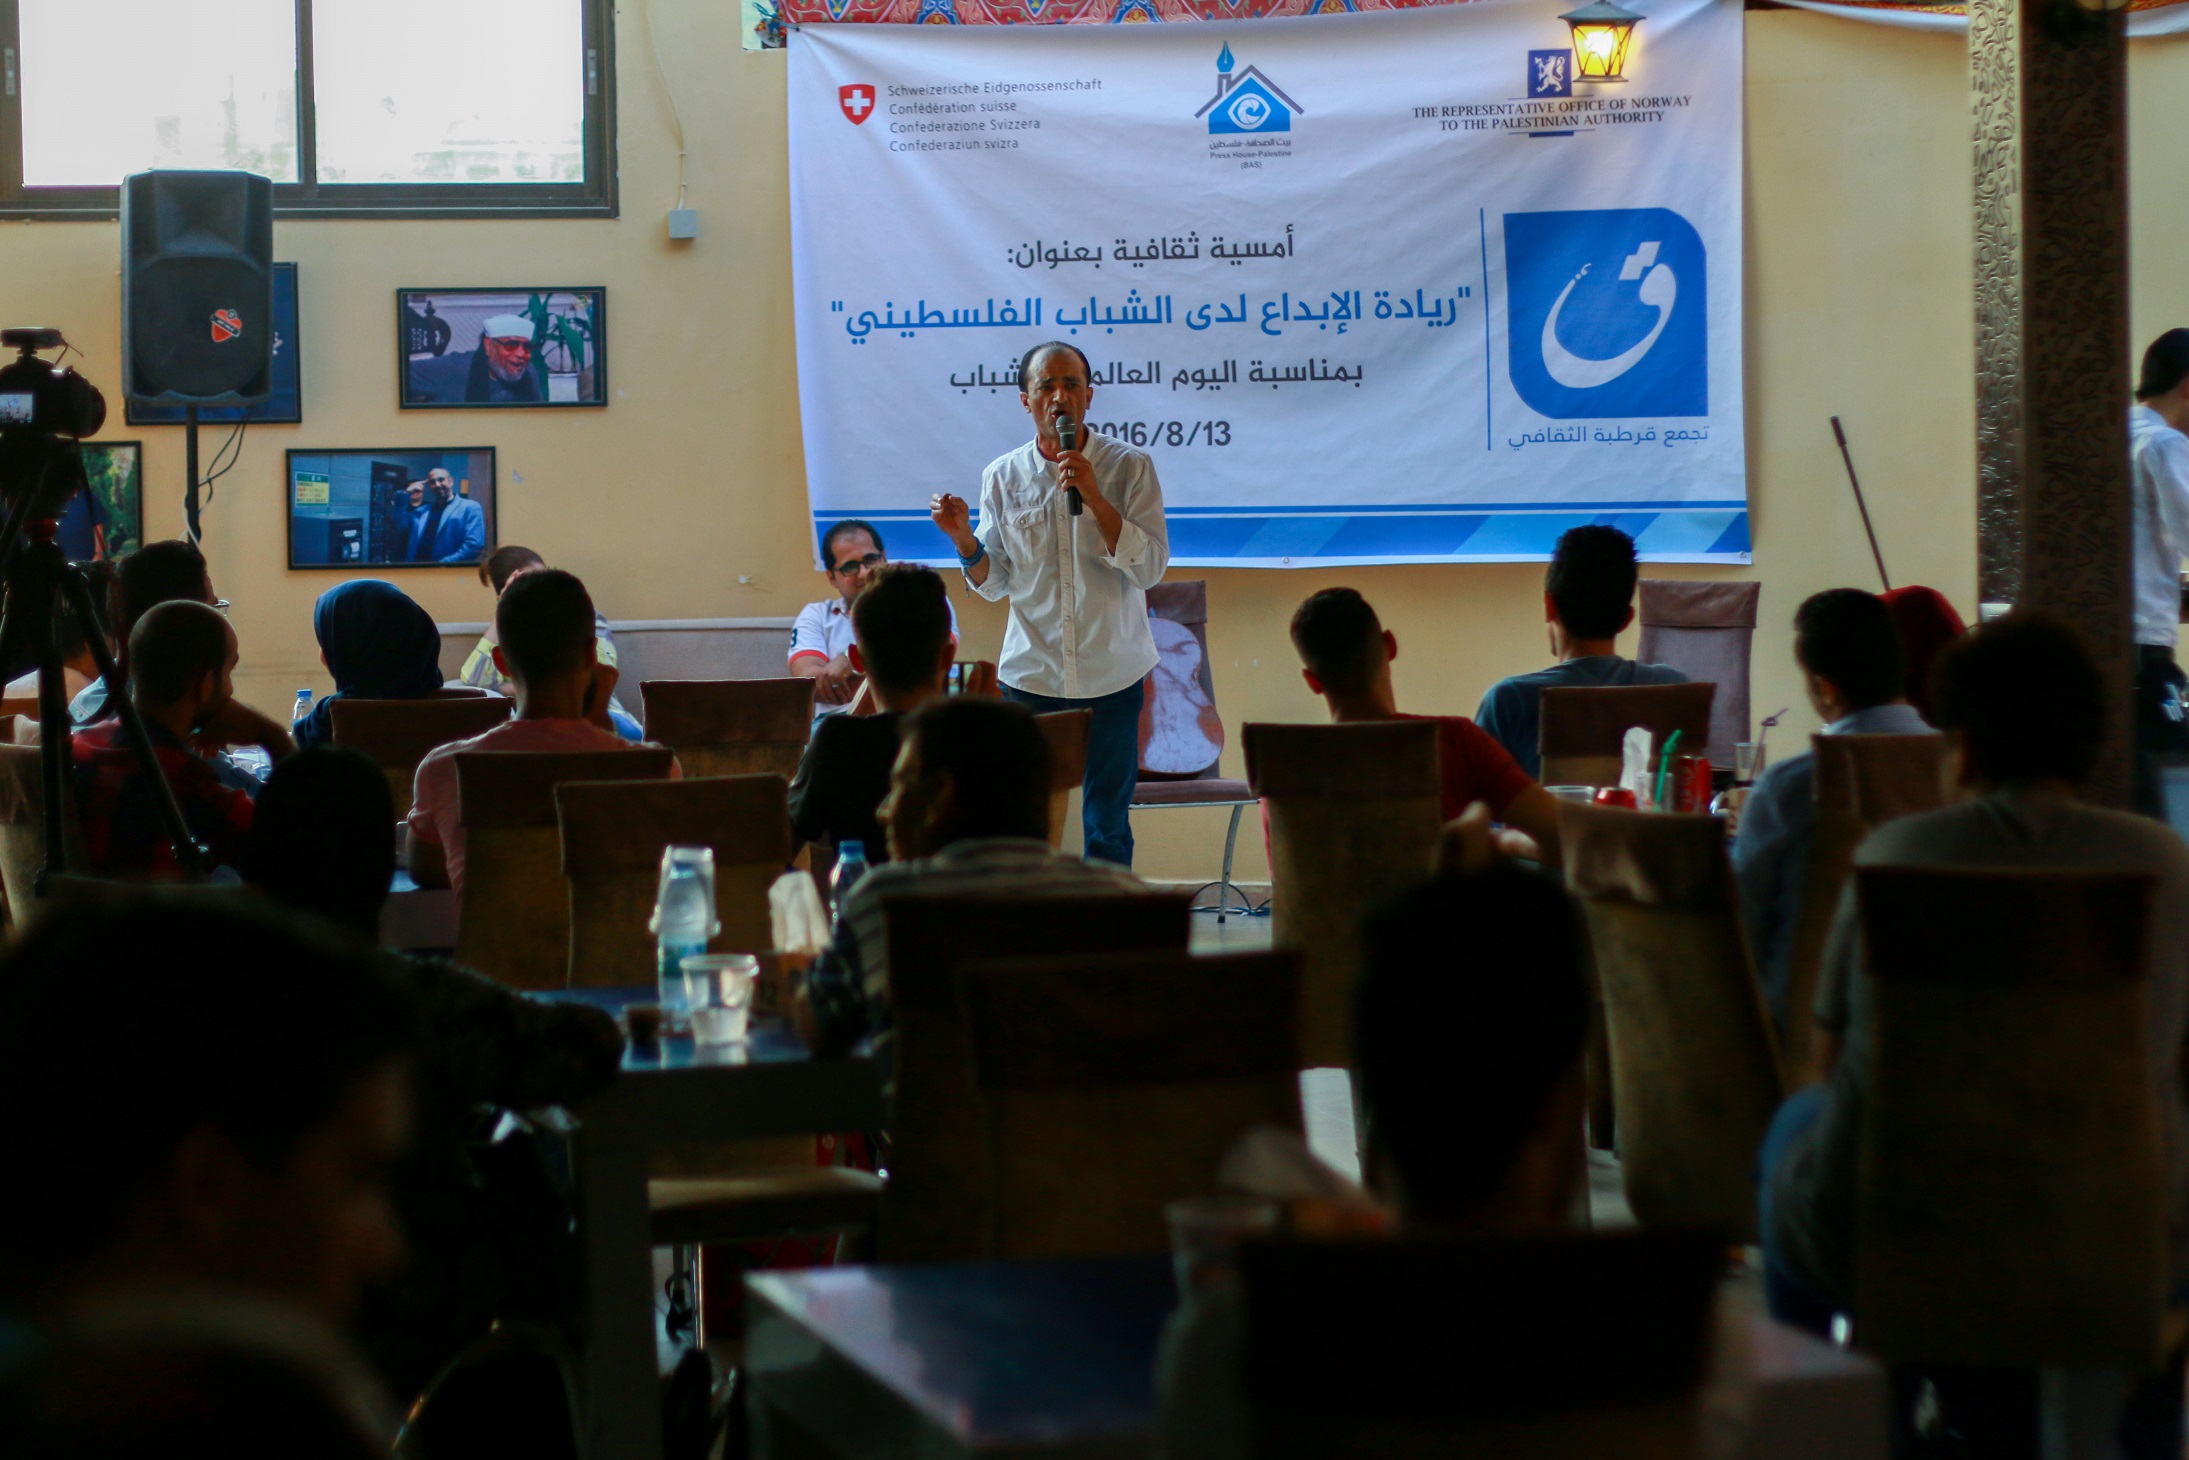 Sponsored by Press House, Qurtoba Organized a cultural meeting on the occasion of the international day of youth.